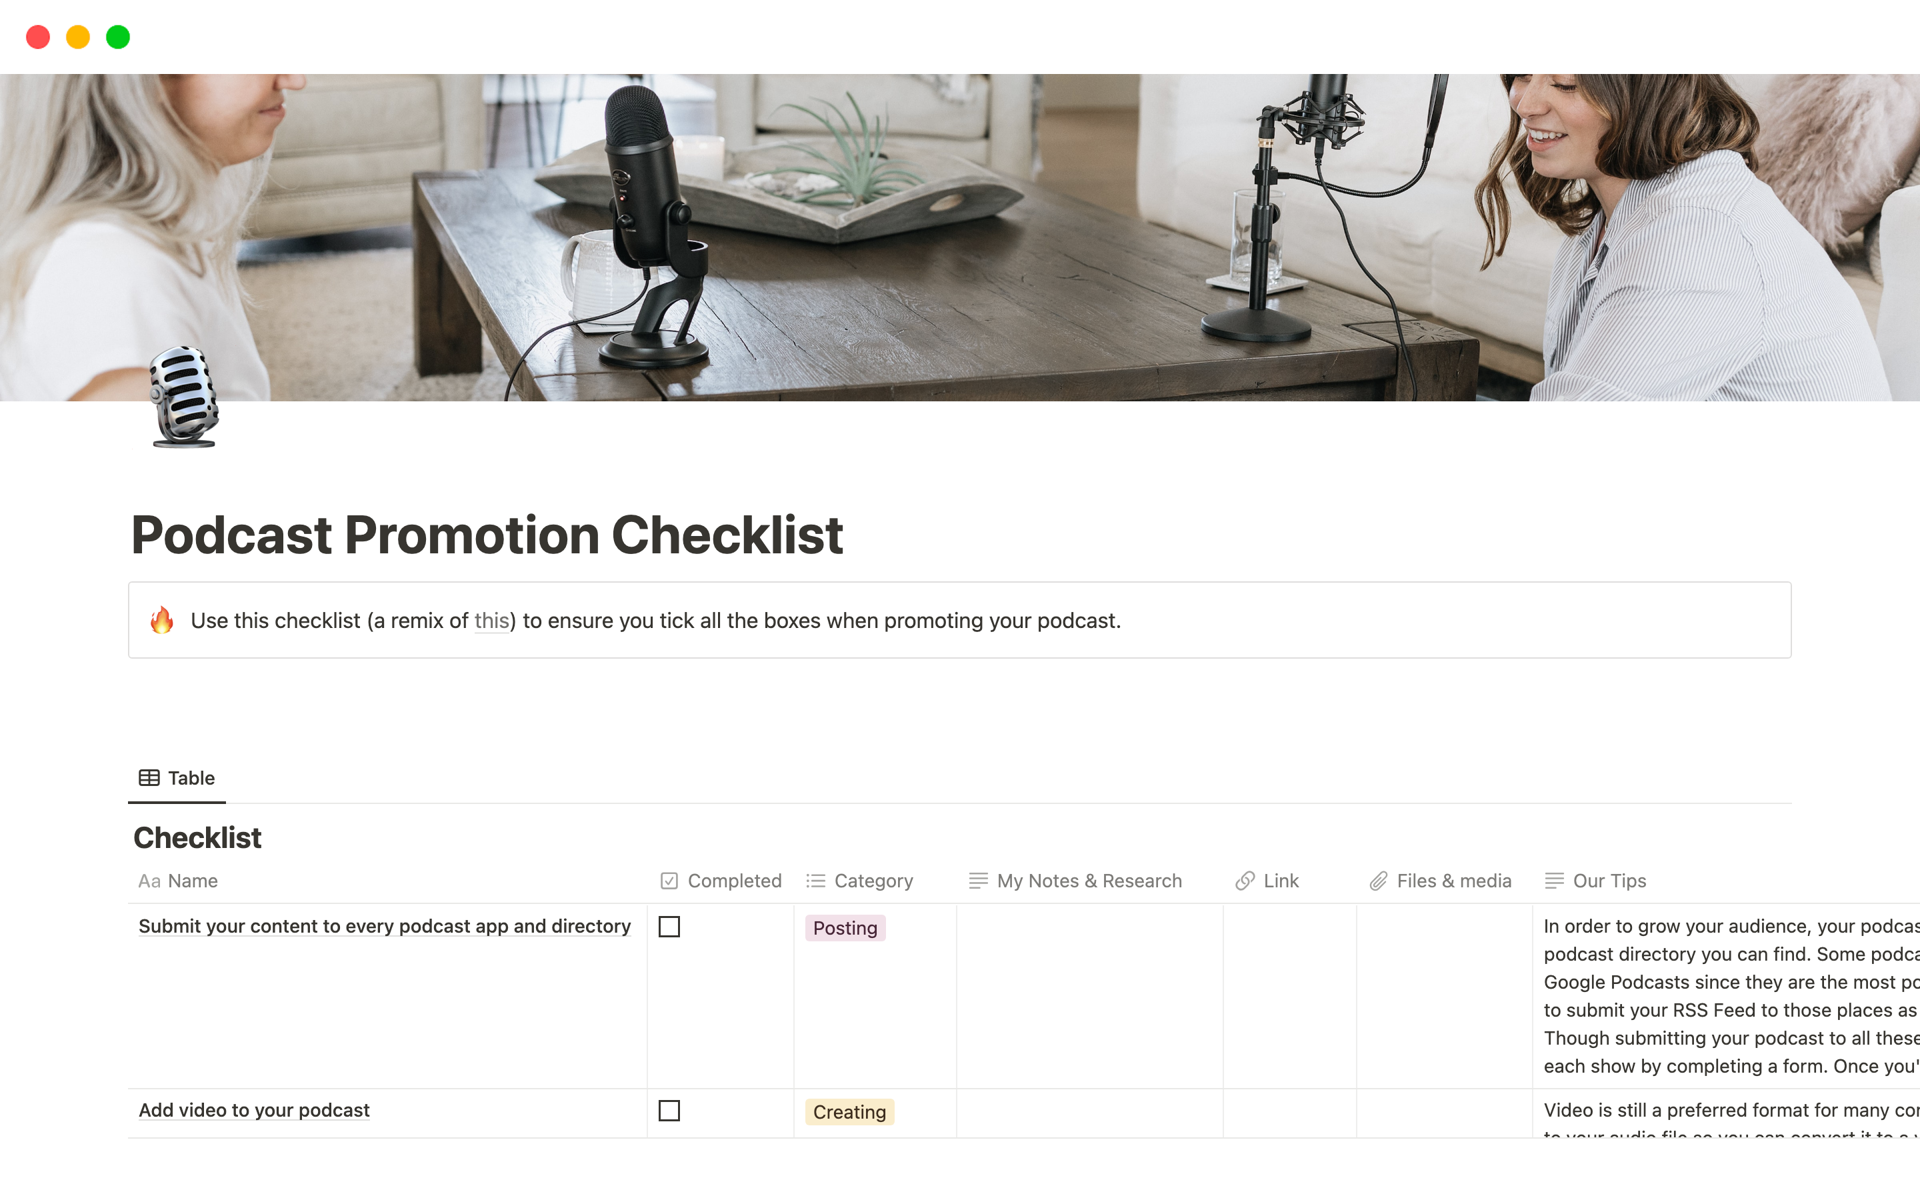 This Notion checklist template is perfect for running through different podcast promotion ideas to find the best ways to grow your podcast audience.